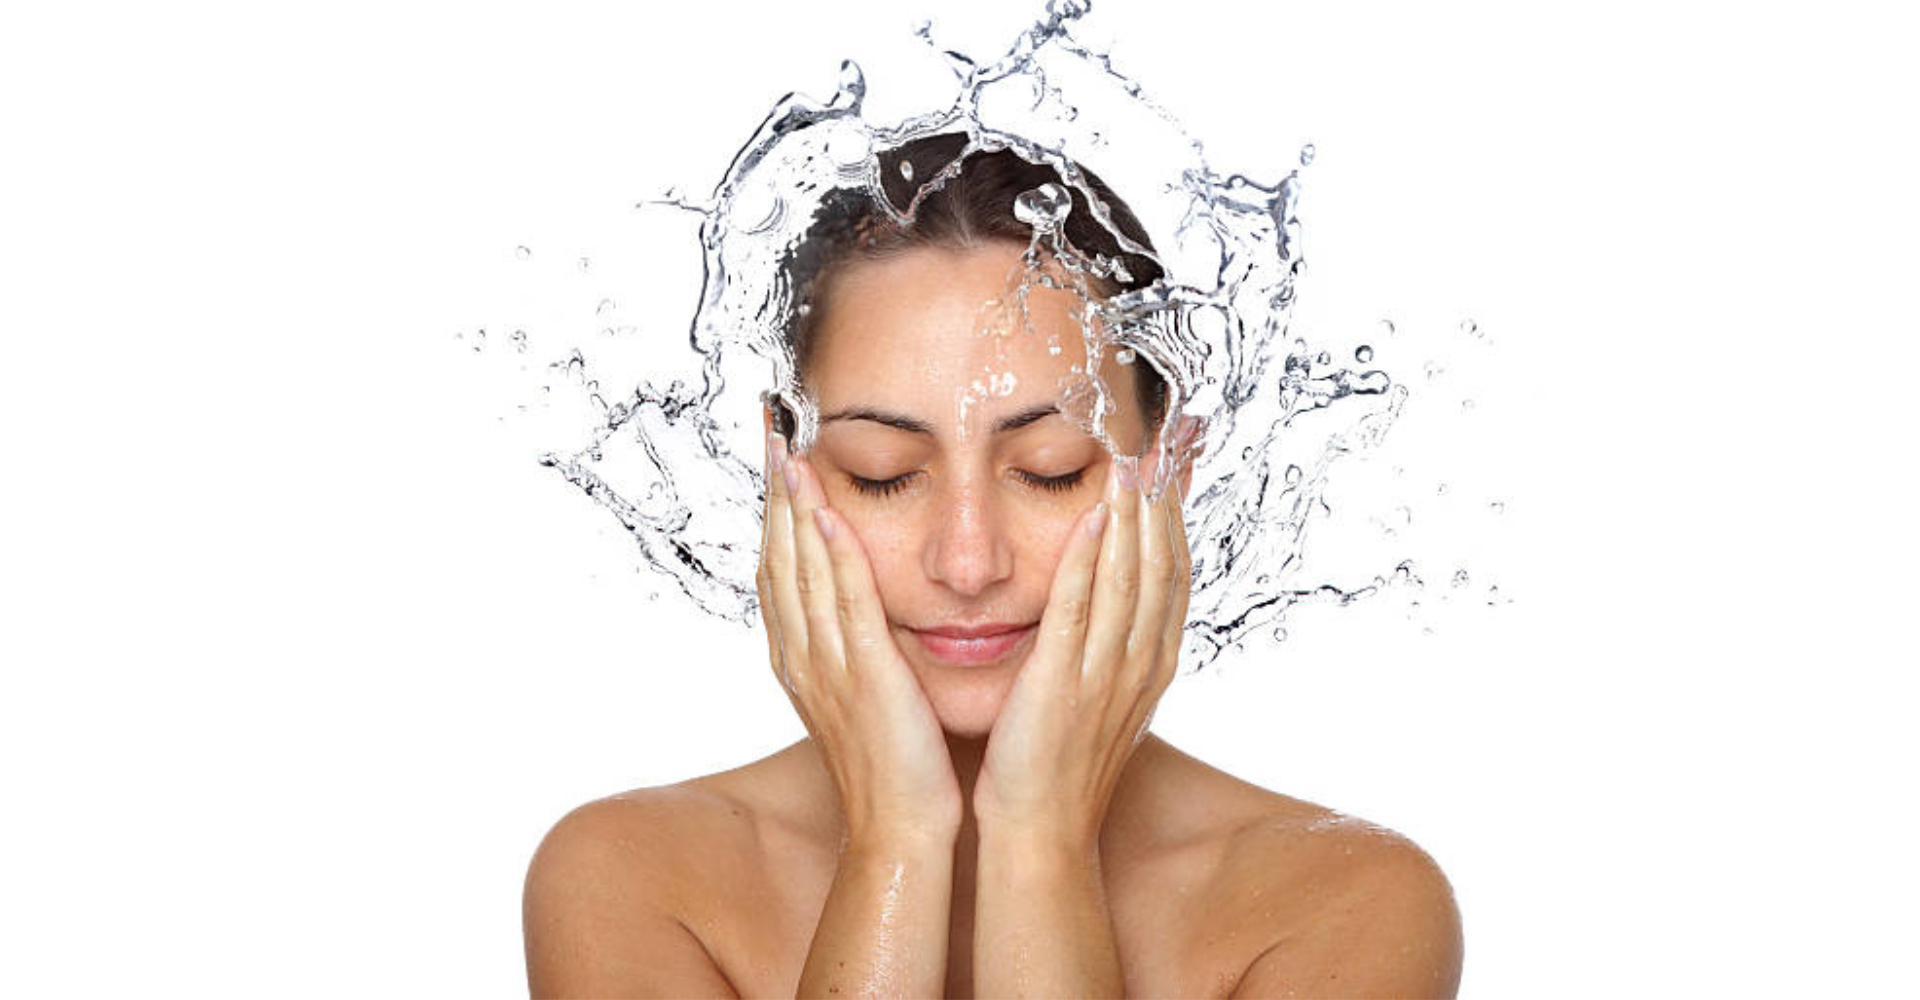 Lady Hydrating her Skin with water